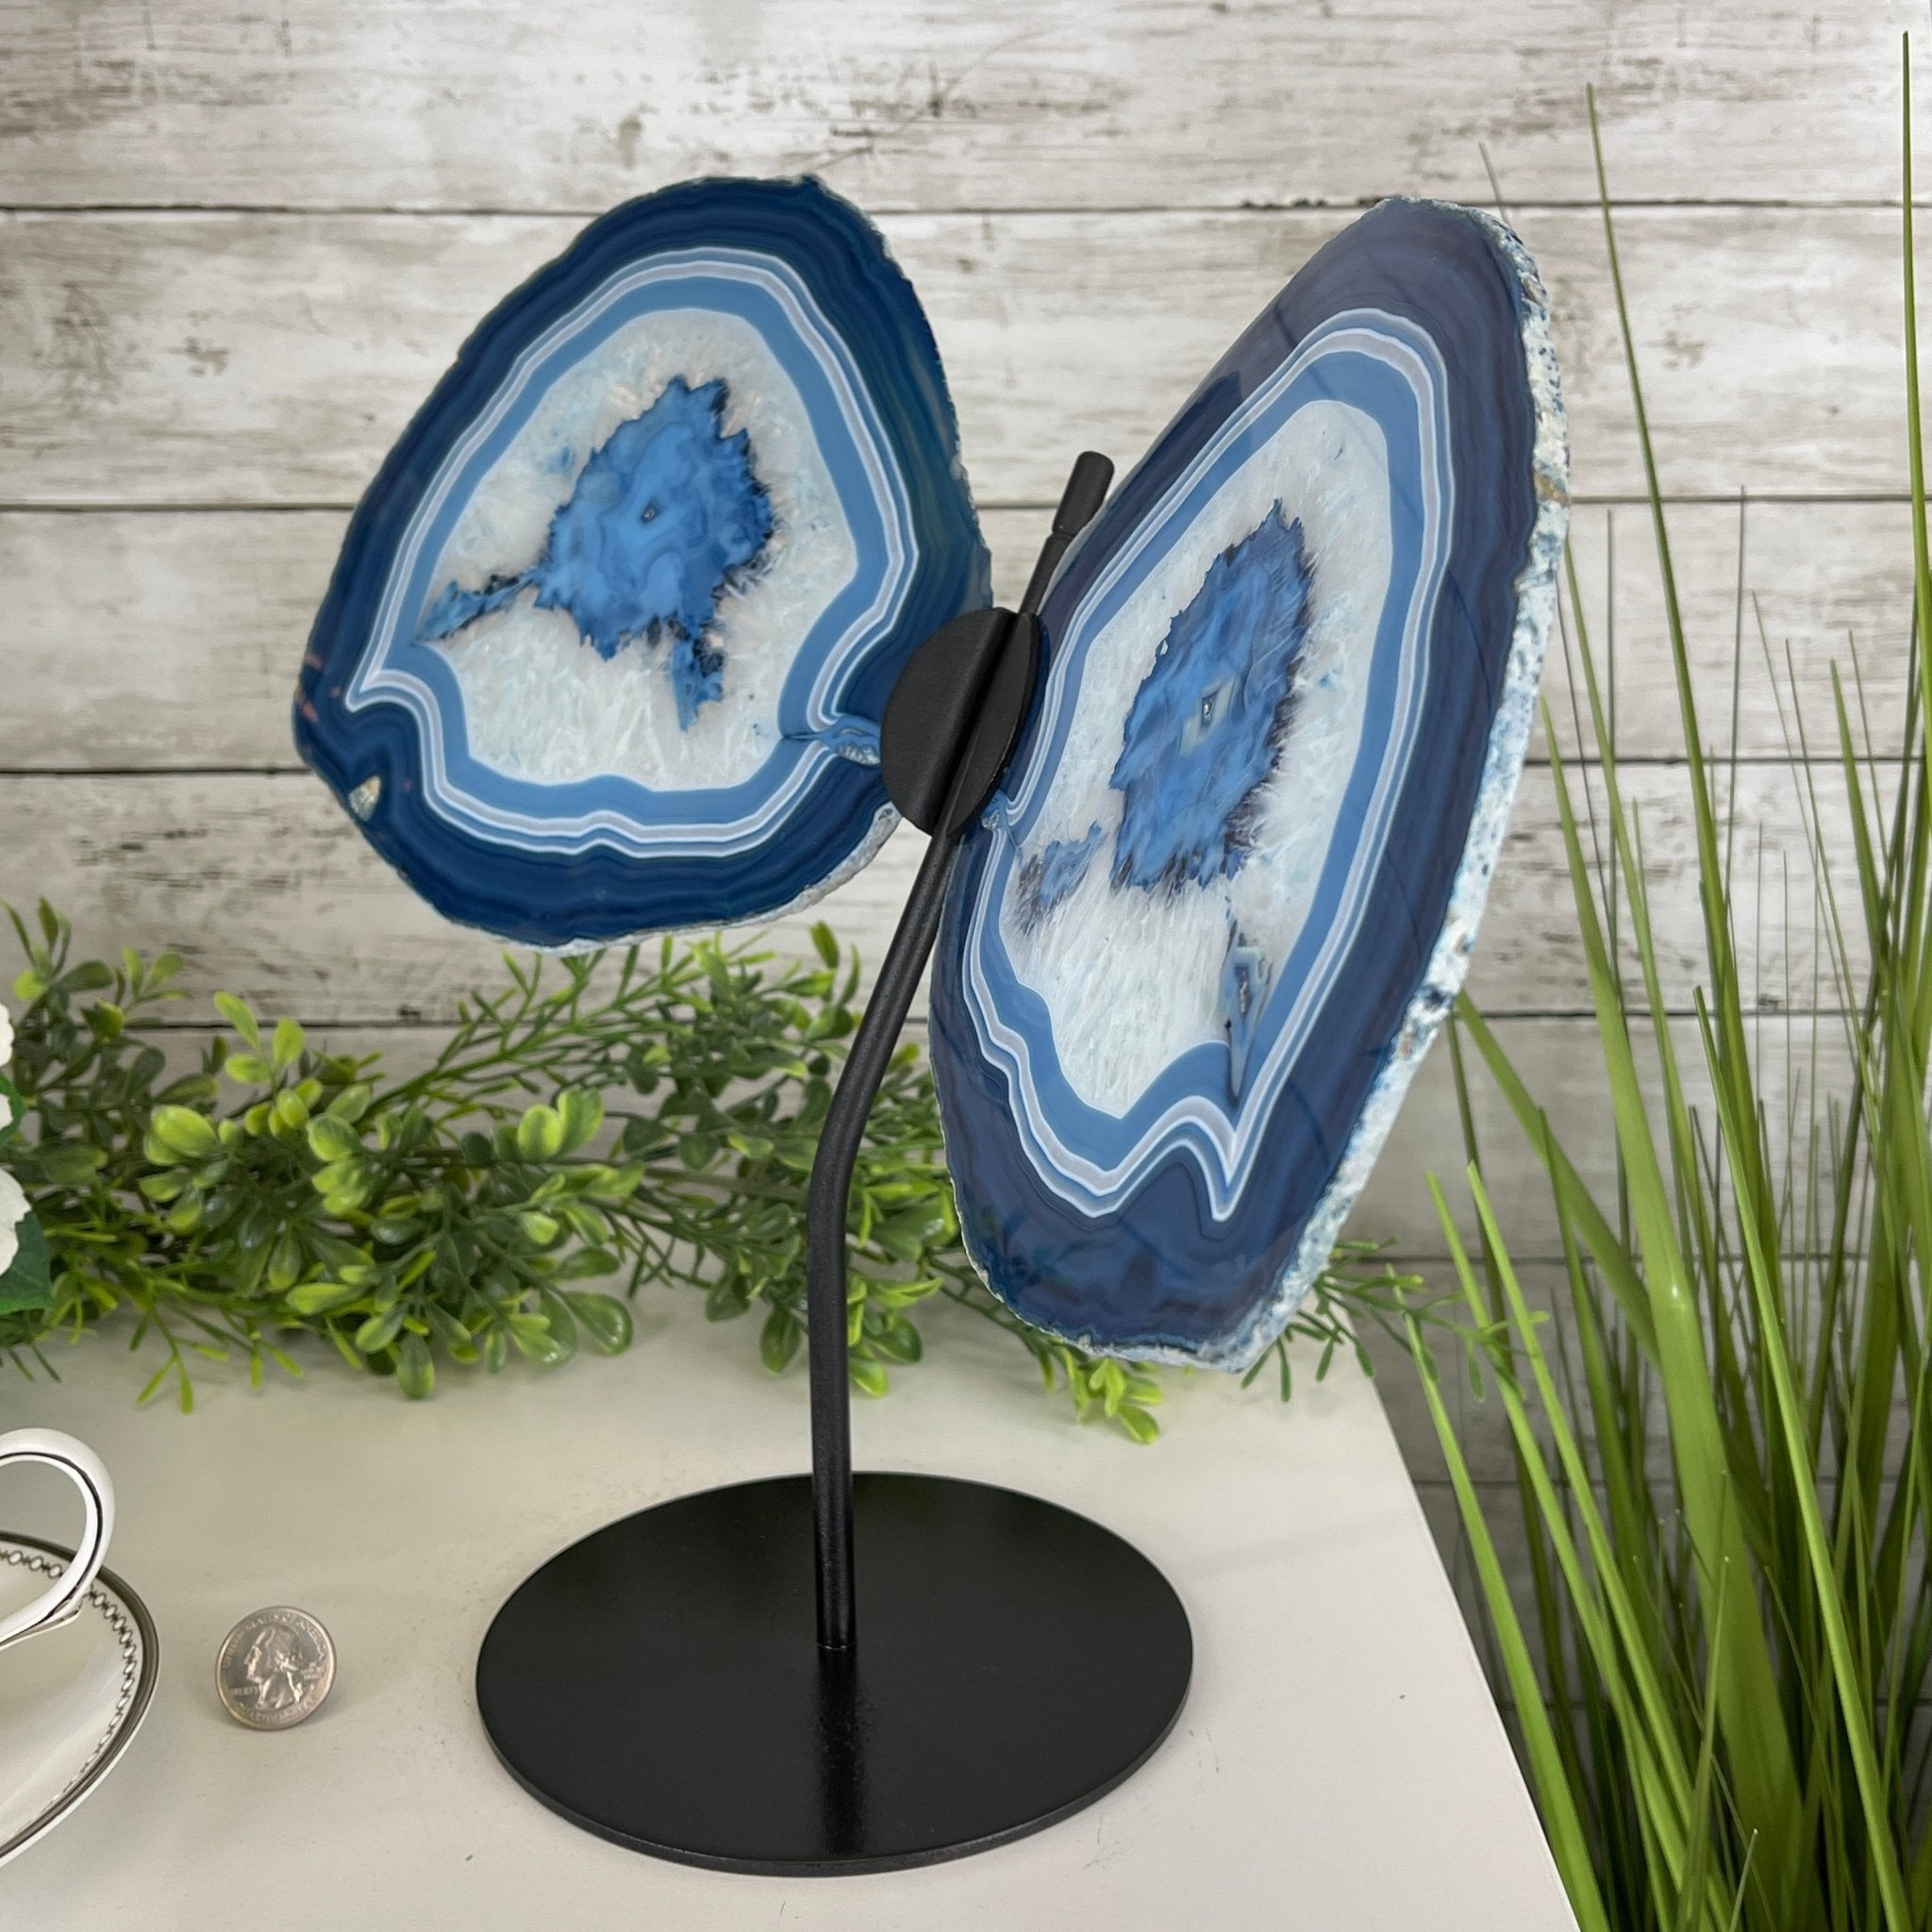 Large Dyed Blue Brazilian Agate "Butterfly Wings", Metal Stand, 12" Tall, Model #5050BL-0045 by Brazil Gems - Brazil GemsBrazil GemsLarge Dyed Blue Brazilian Agate "Butterfly Wings", Metal Stand, 12" Tall, Model #5050BL-0045 by Brazil GemsAgate Butterfly Wings5050BL-0045